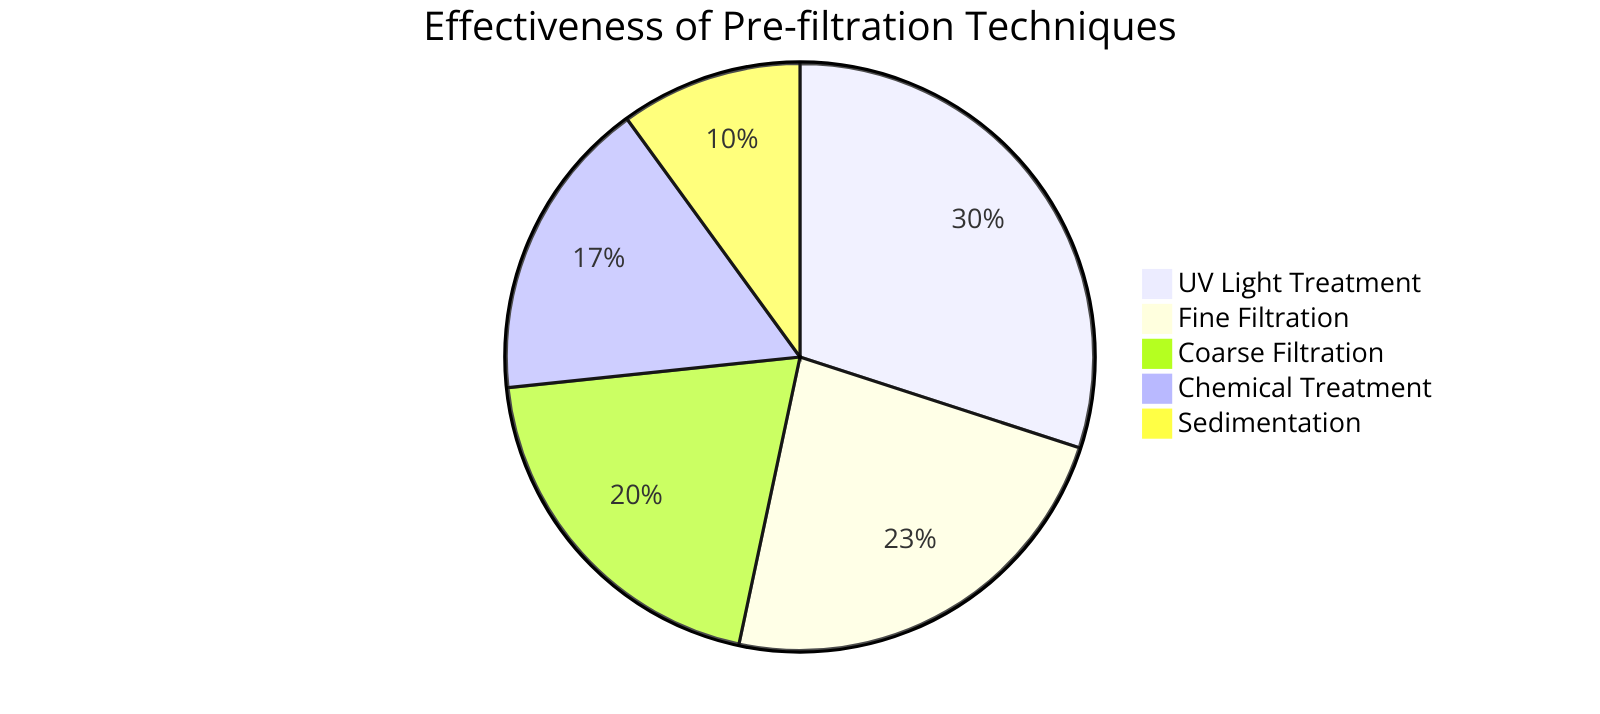 the effectiveness of pre-filtration techniques